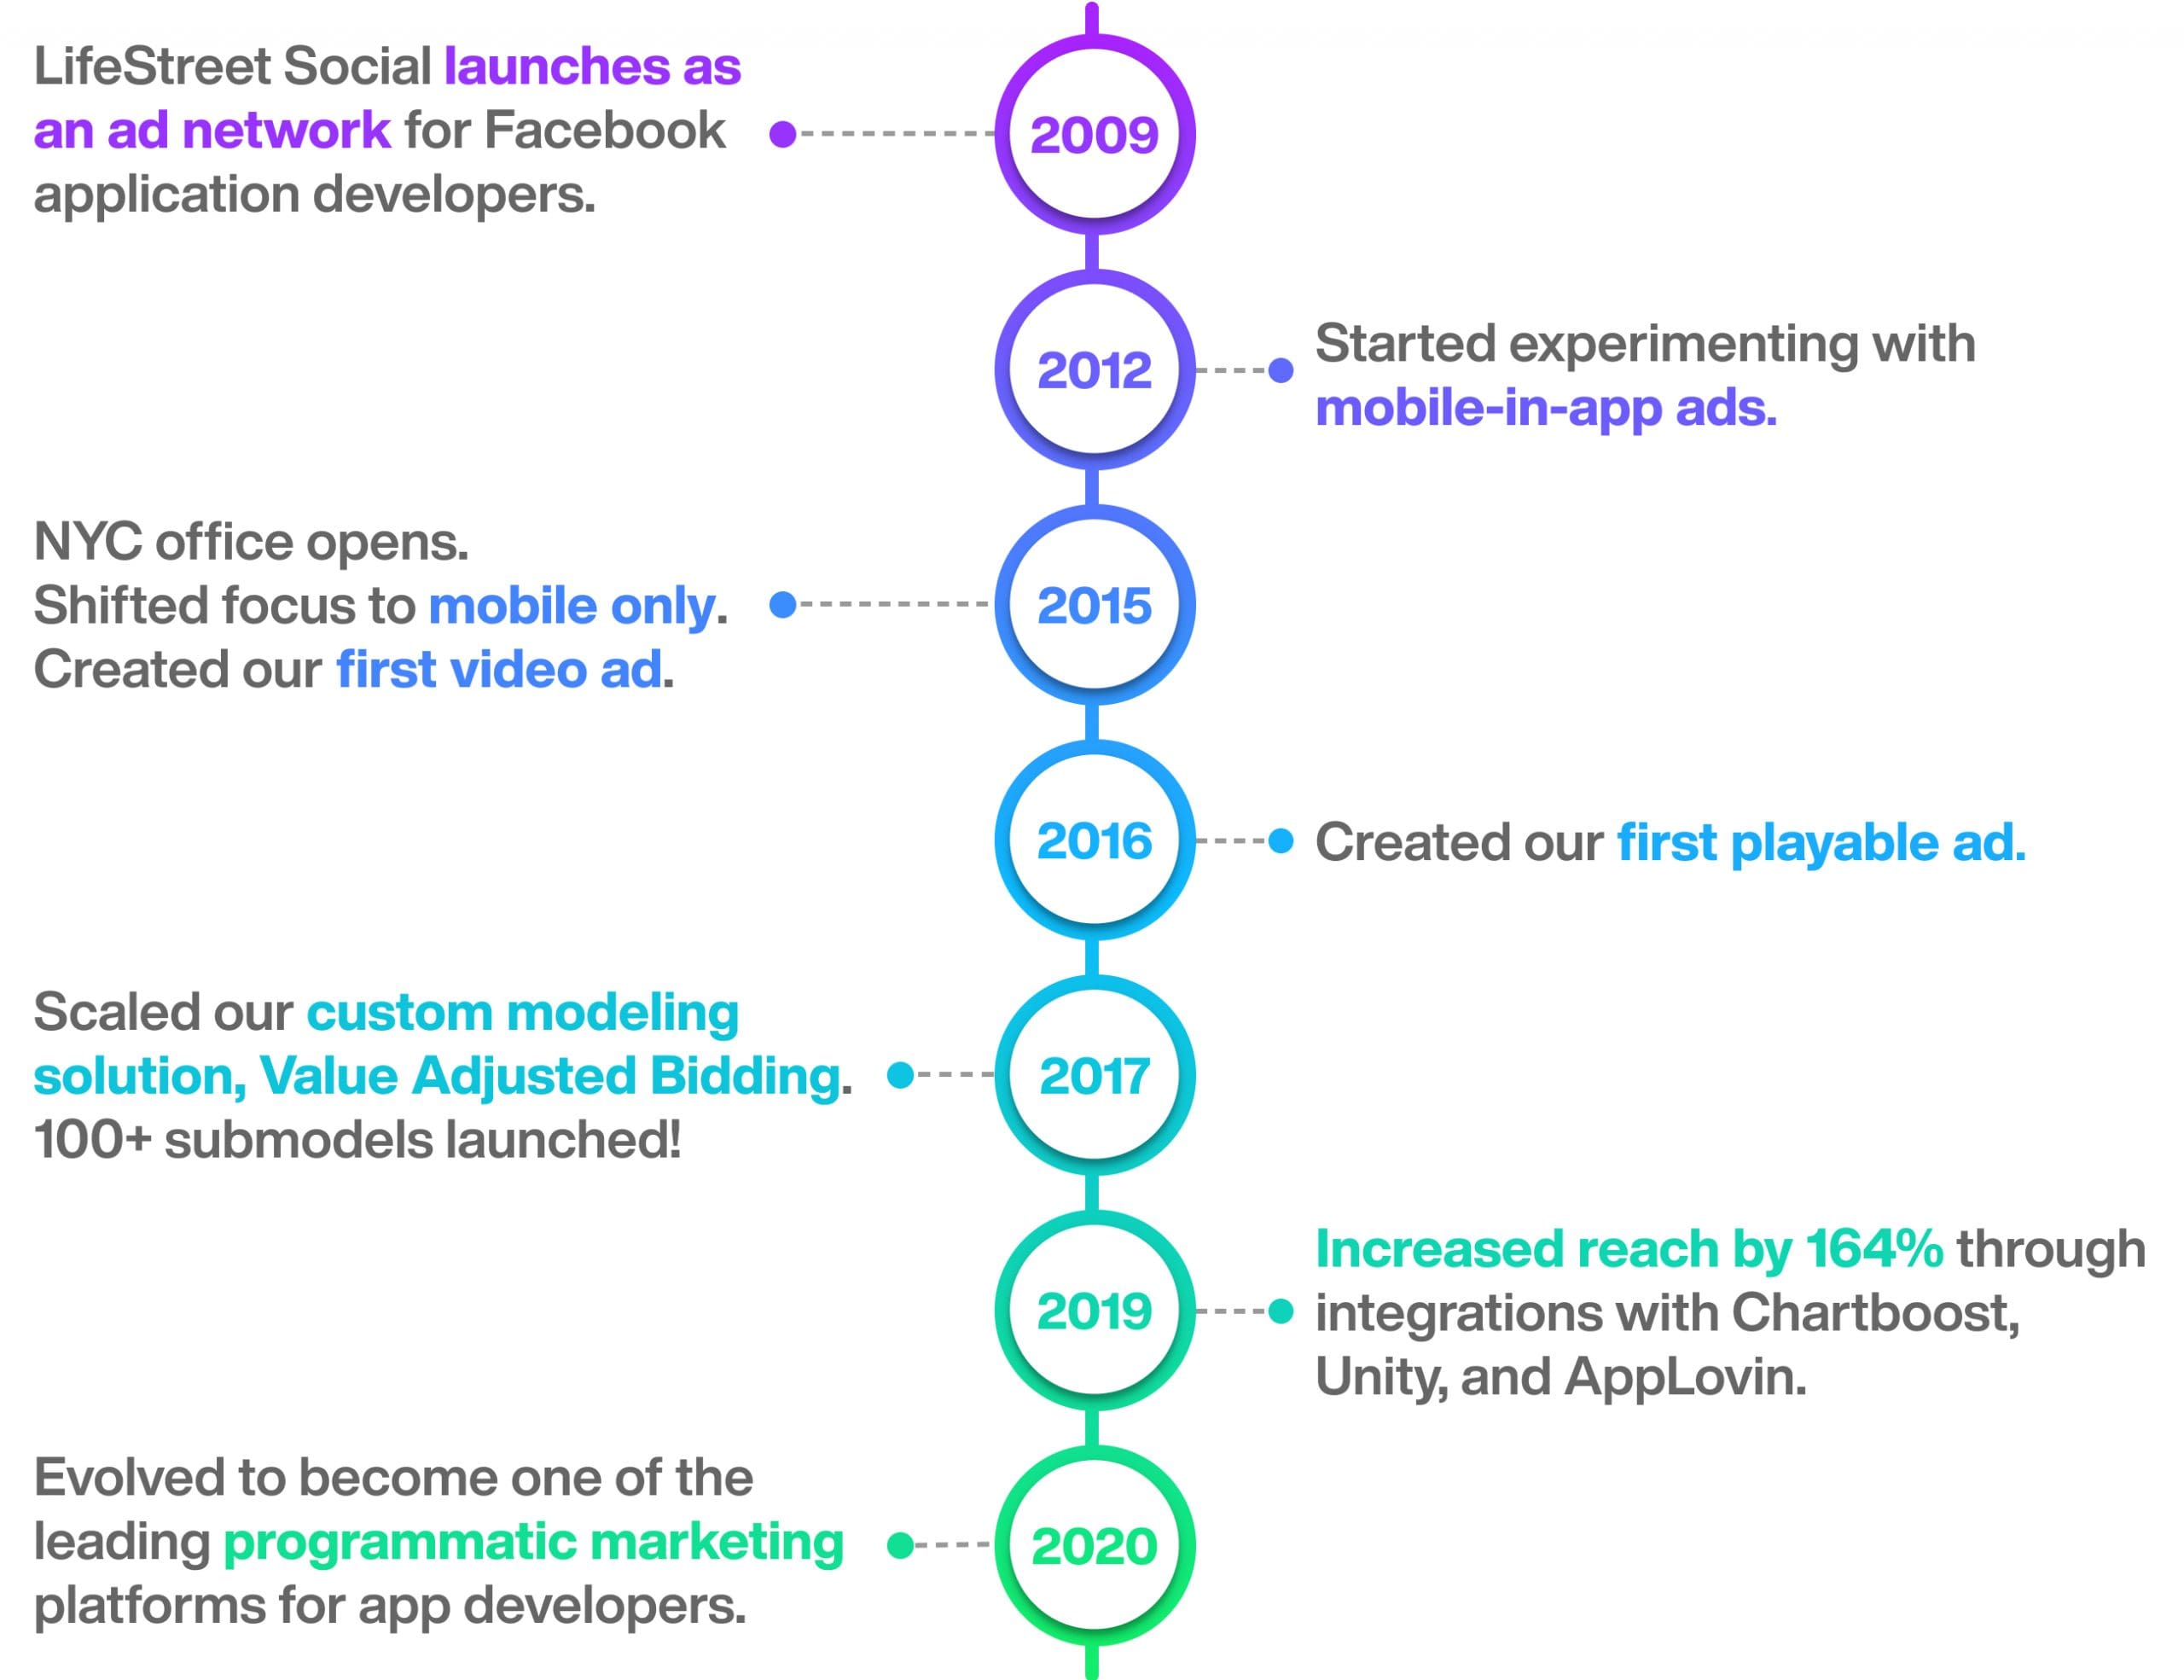 LifeStreet timeline from launching as an ad network to becoming one of the leading programmatic marketing platforms for app developers